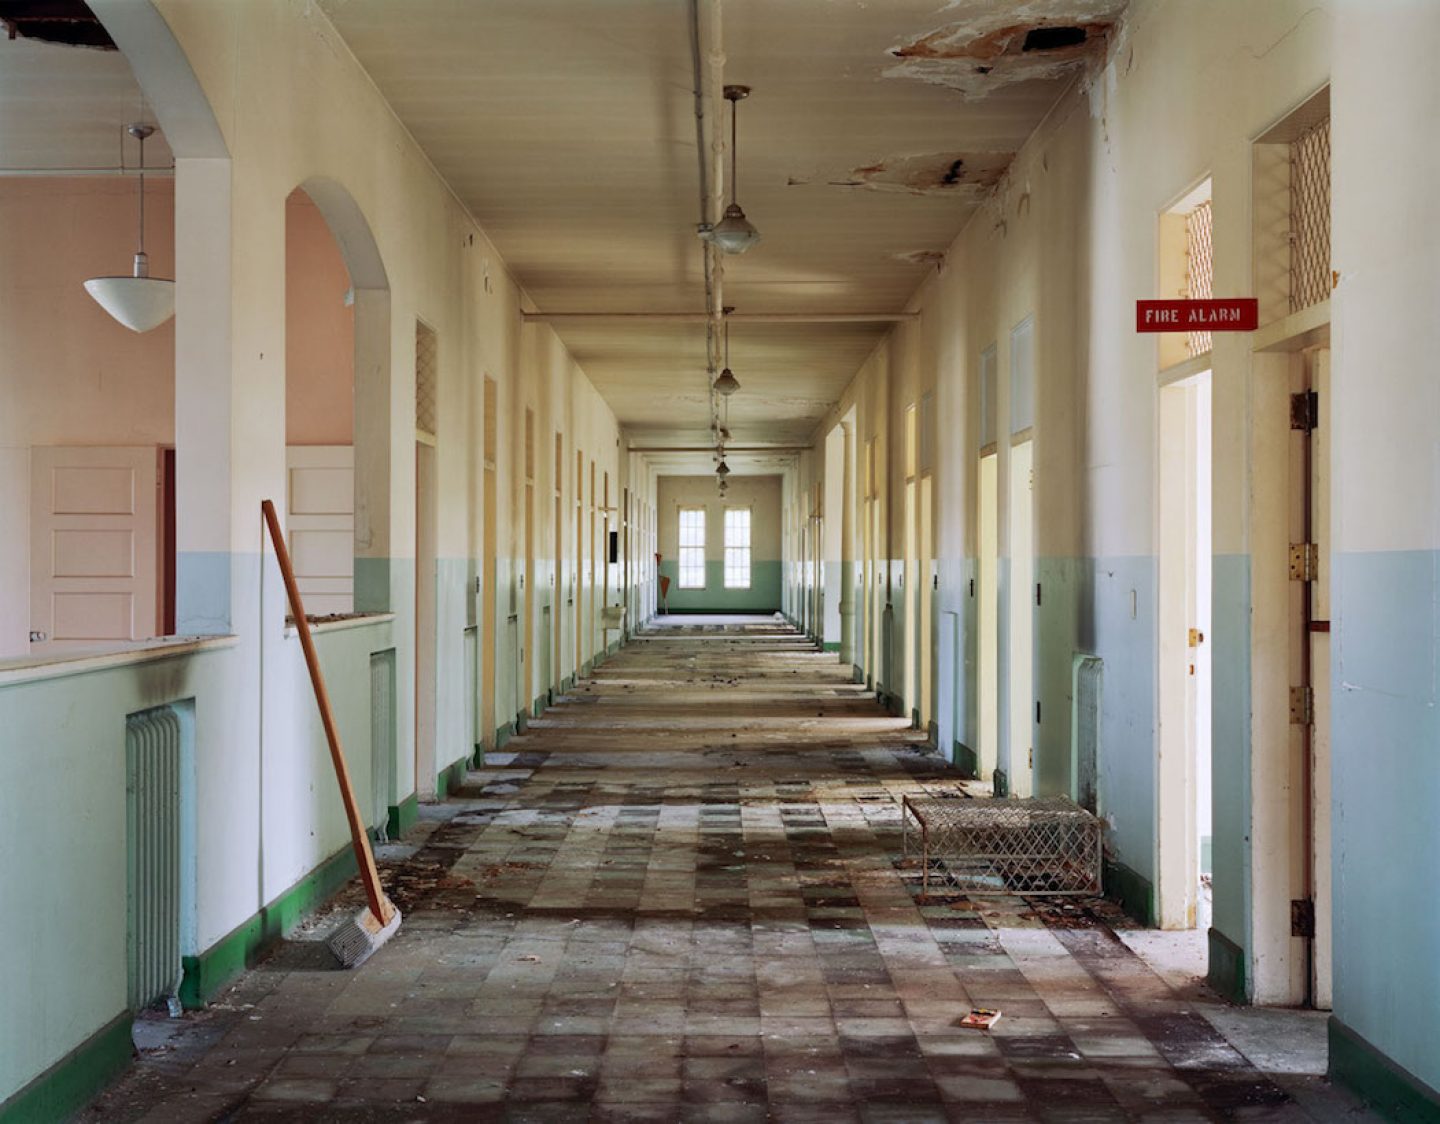 Asylum: Inside the Closed World of State Mental Hospitals